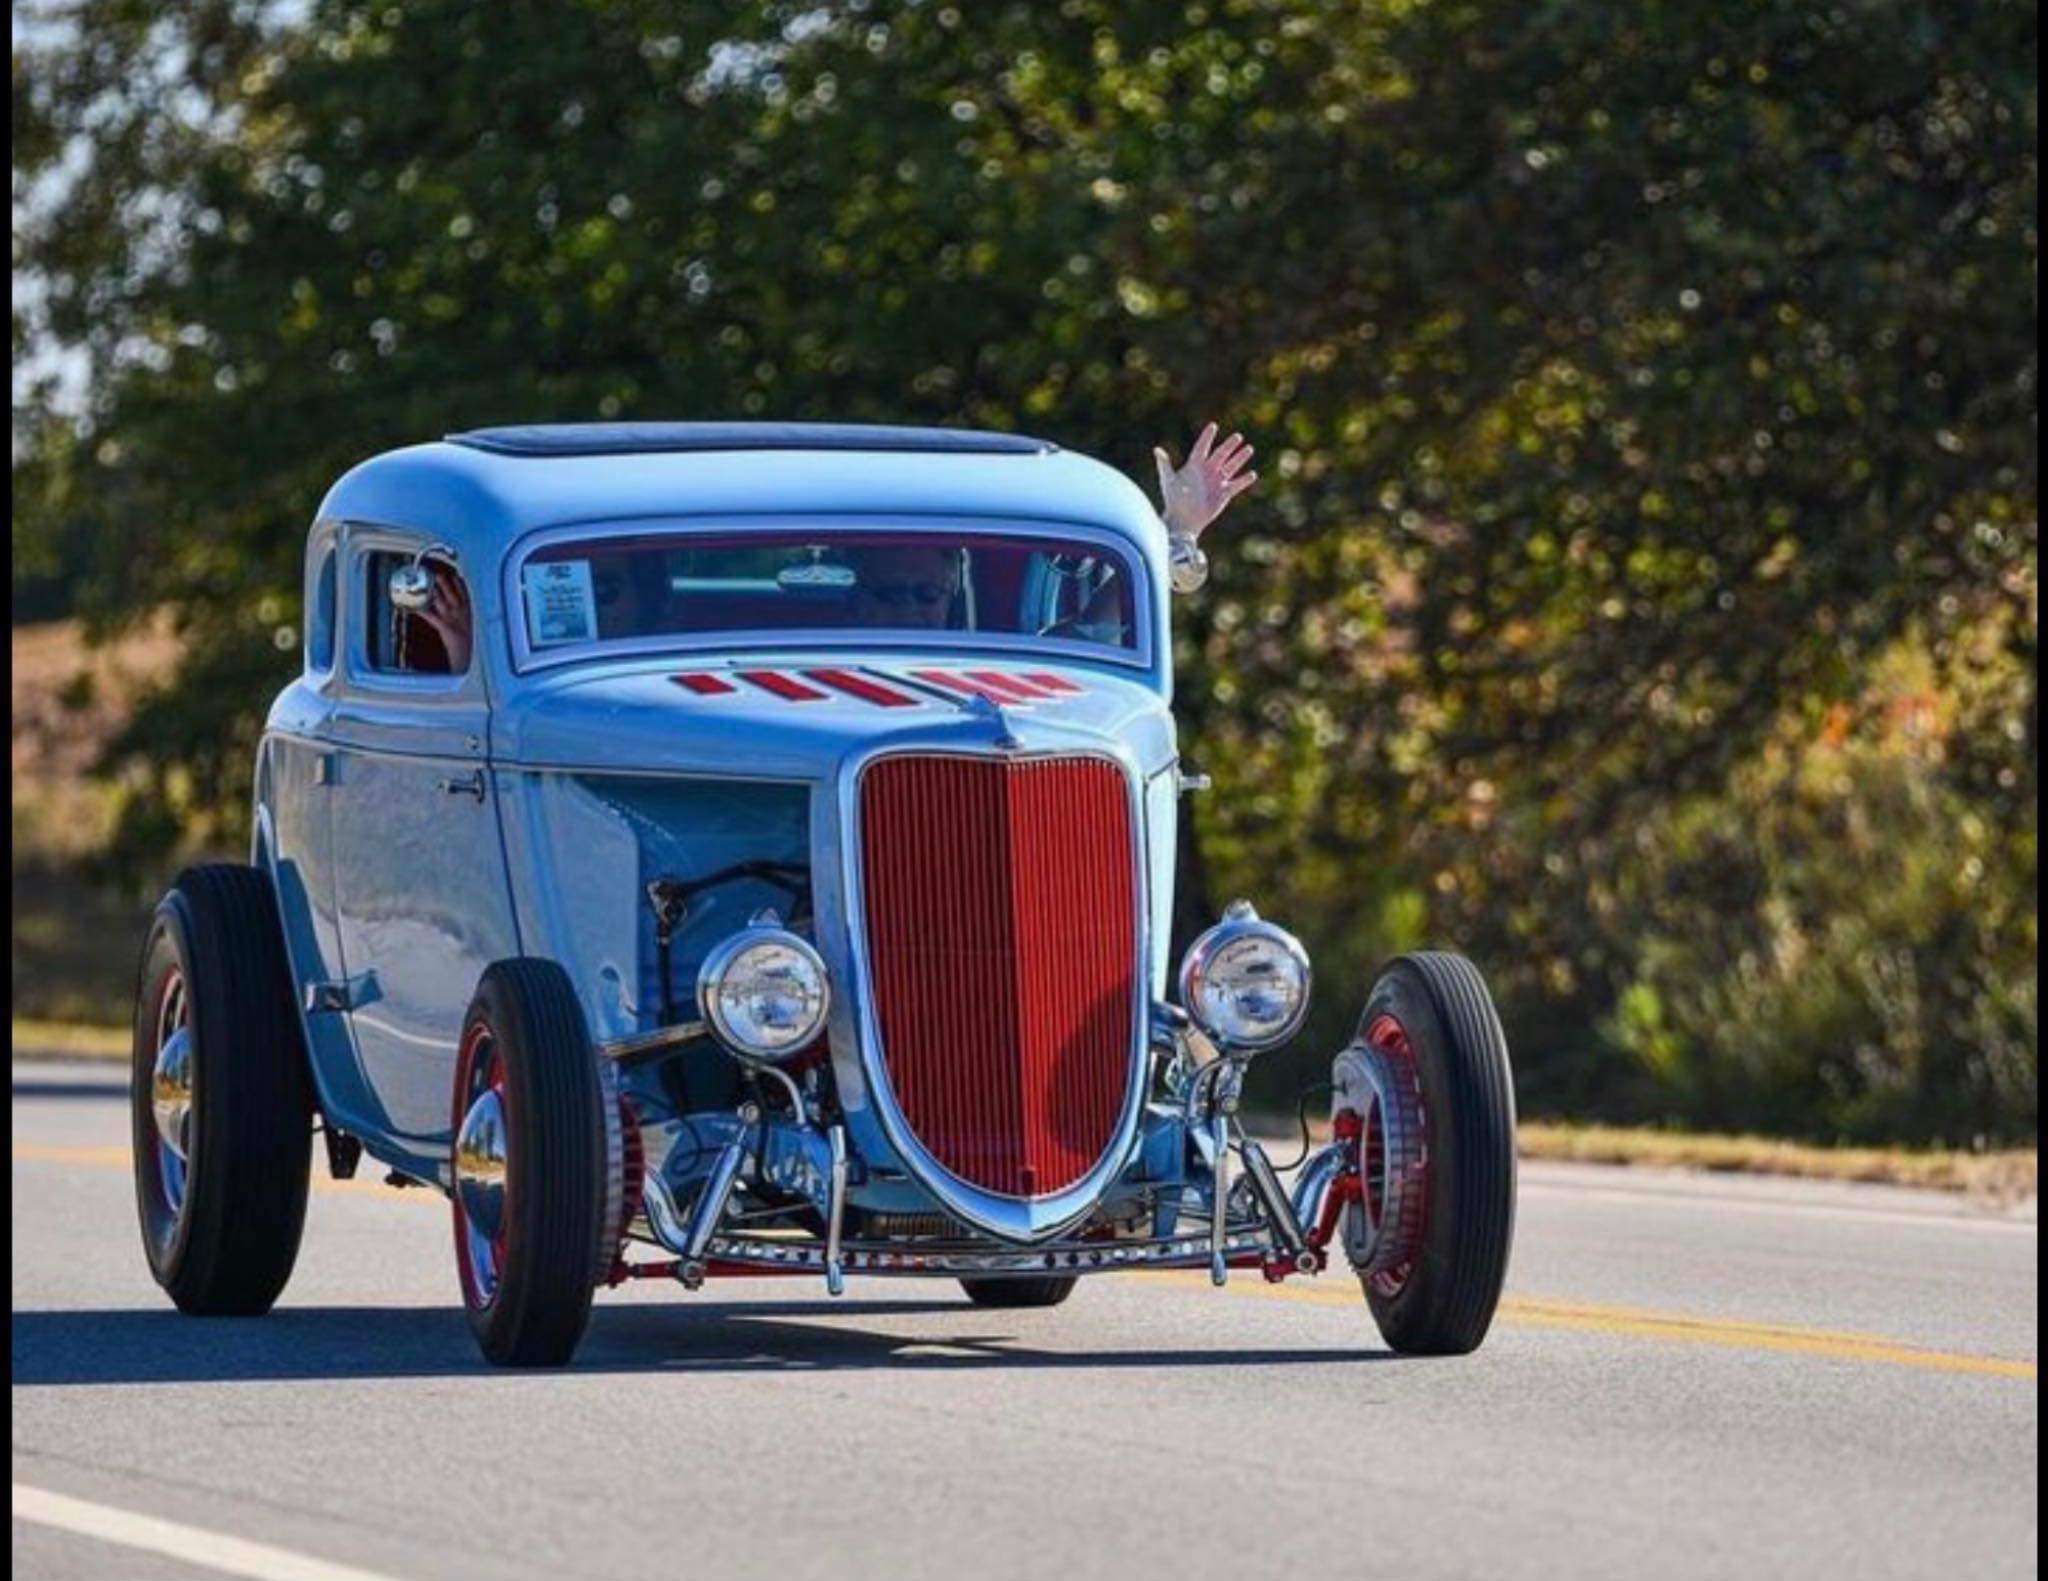 1934 Henry Ford Steel Coupe – $95,000